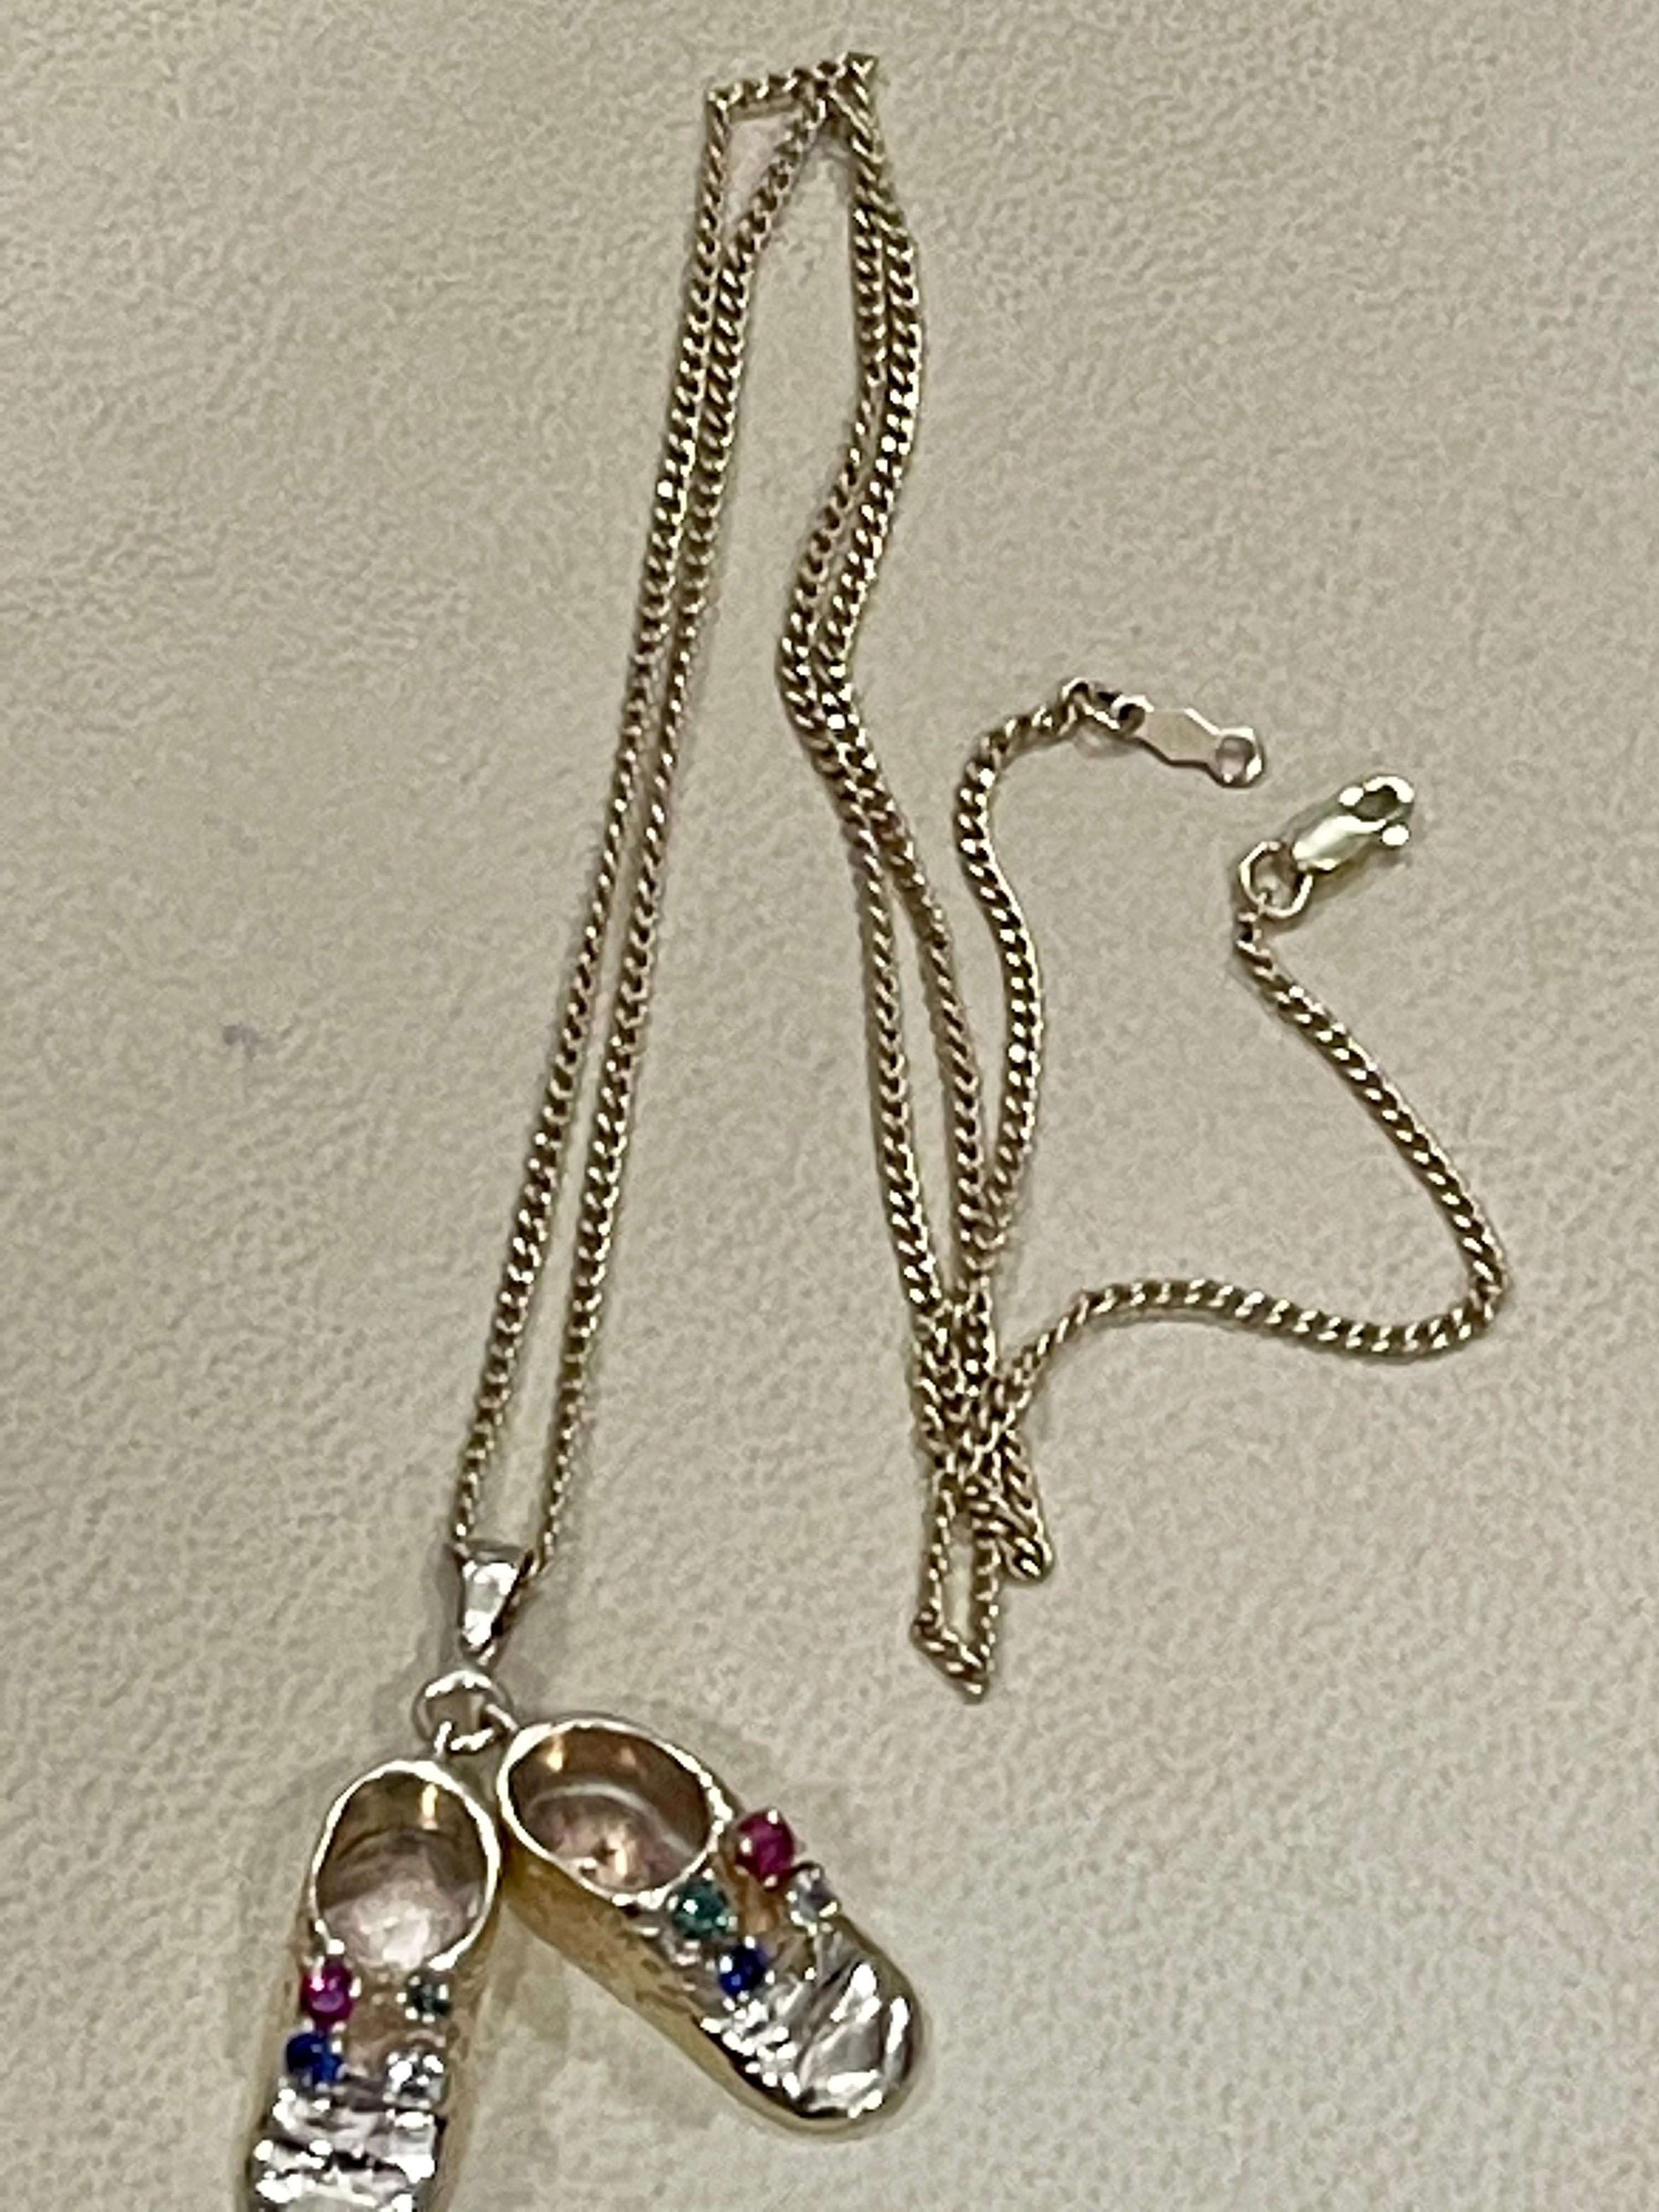 Pair of Shoe Charms with Precious Stone Pendant Necklace and Yellow Gold Chain For Sale 2